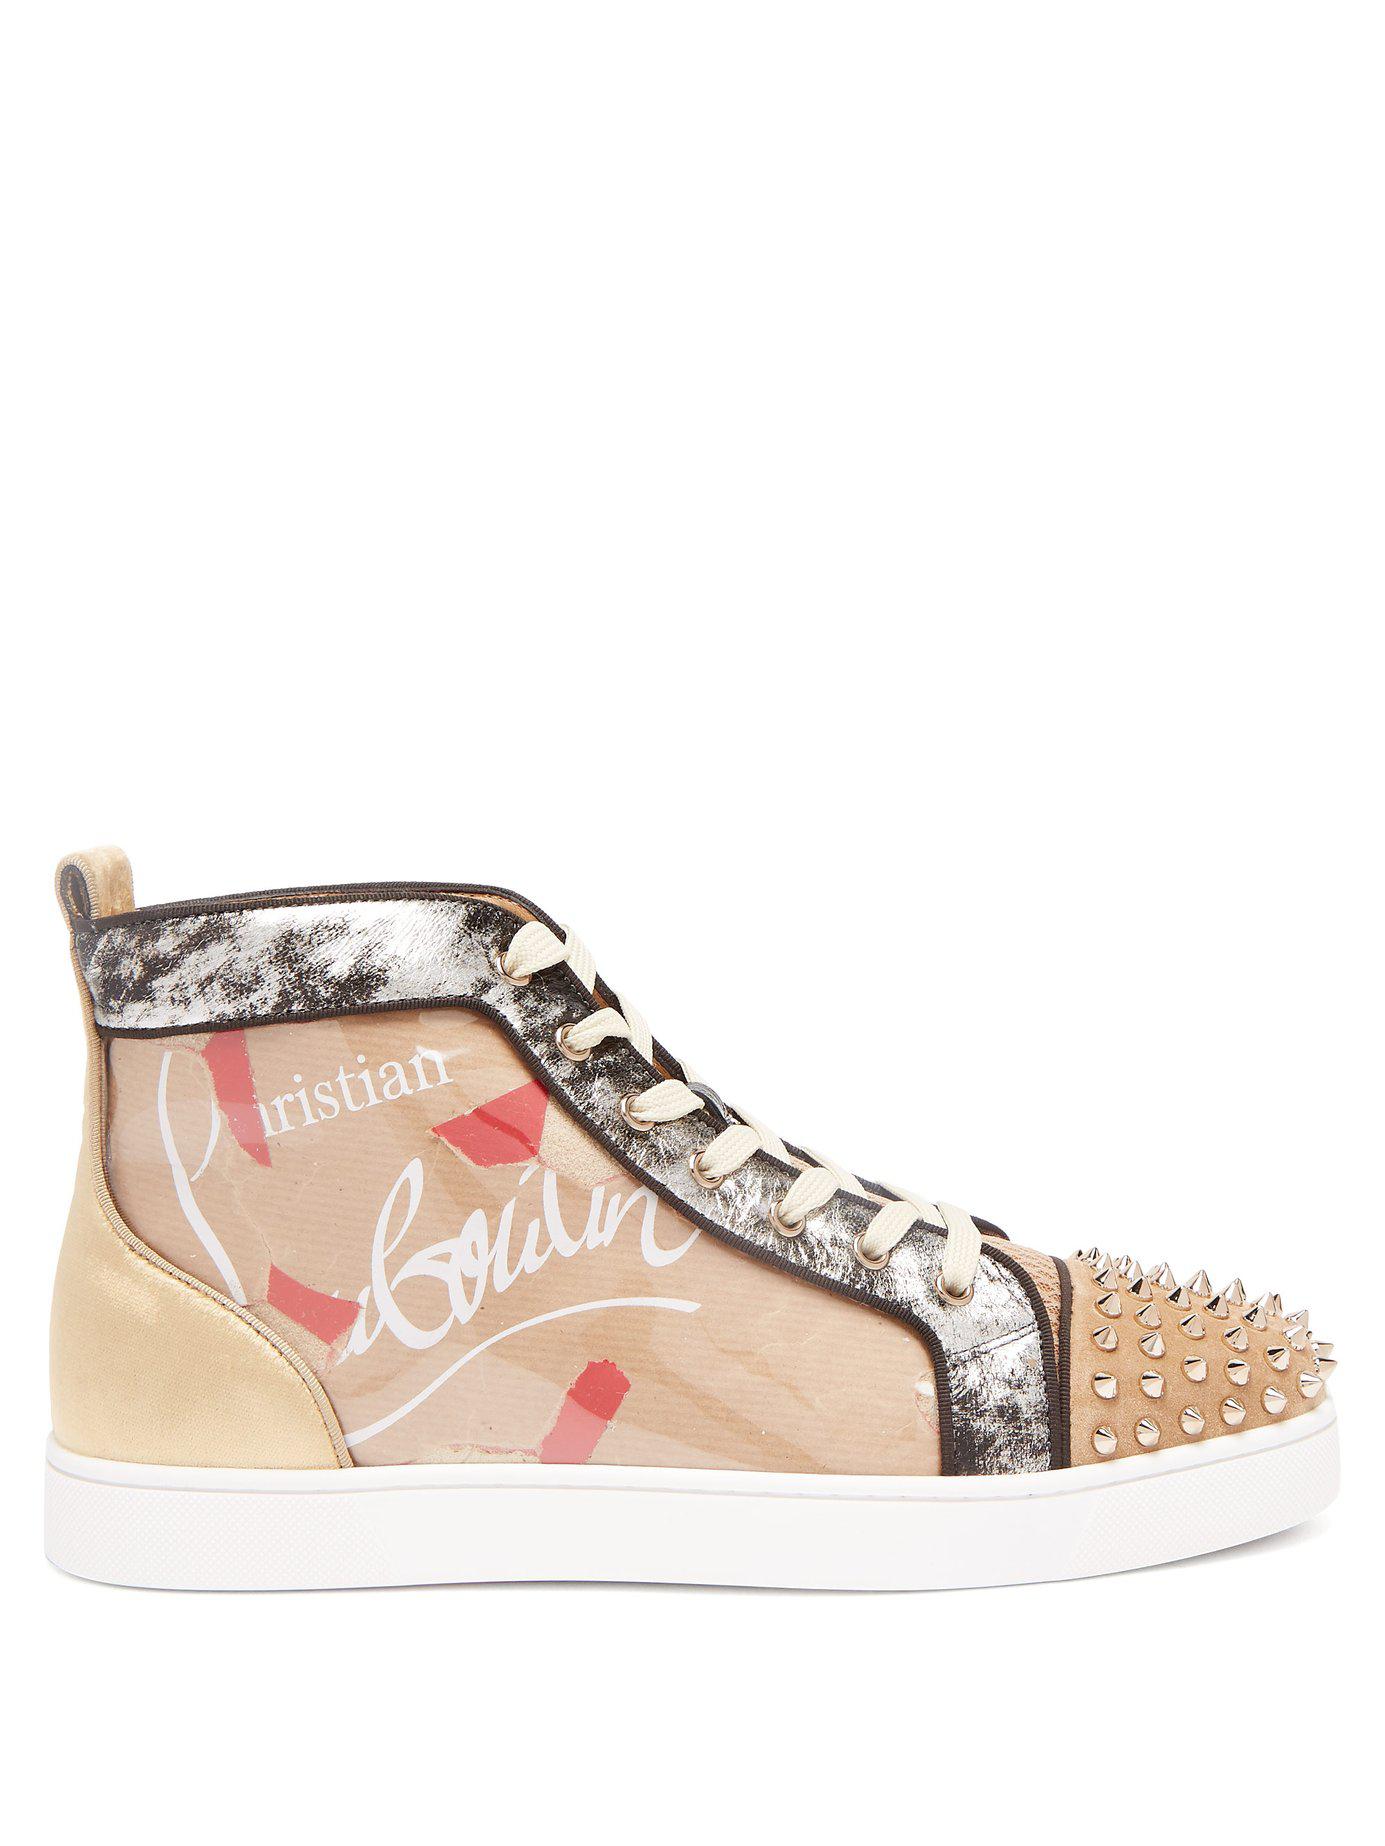 Christian Louboutin Suede Louis Spike Embellished Kraft High Top Trainers  for Men - Lyst